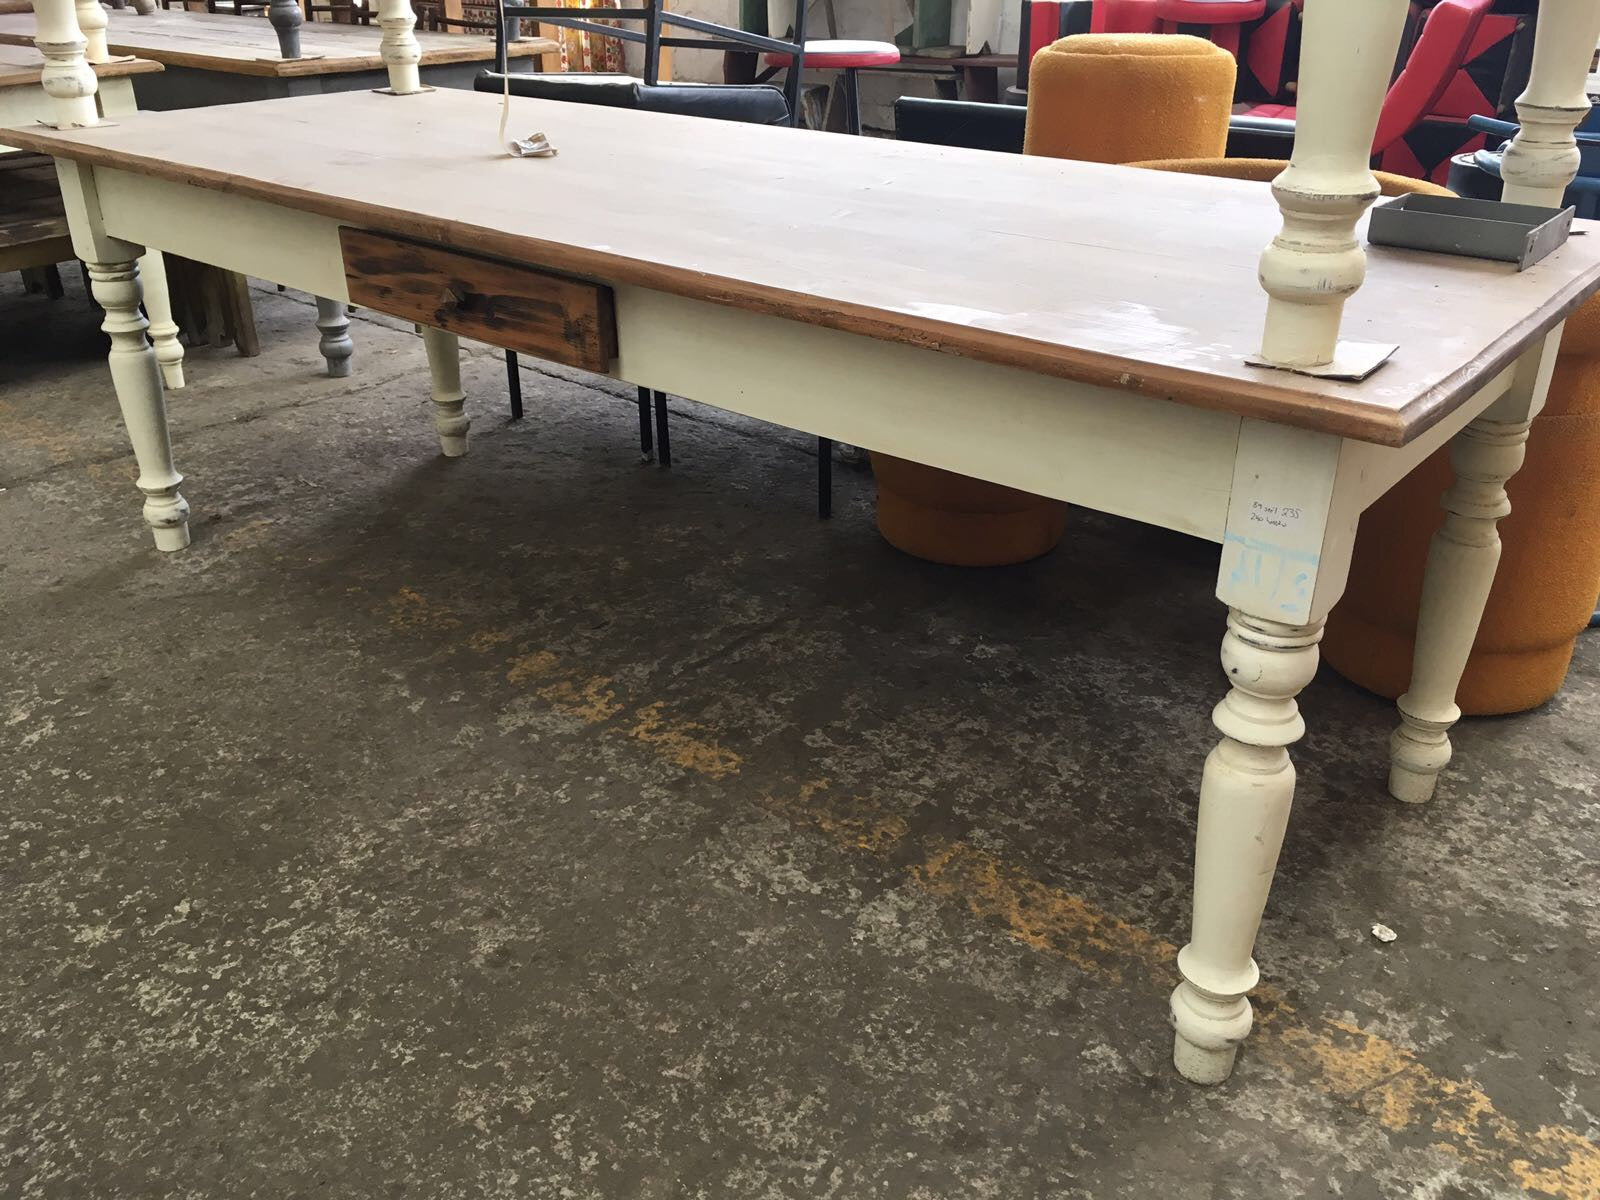 Vintage industrial European kitchen farmhouse dining table 2.2 mt #2102 in Byron